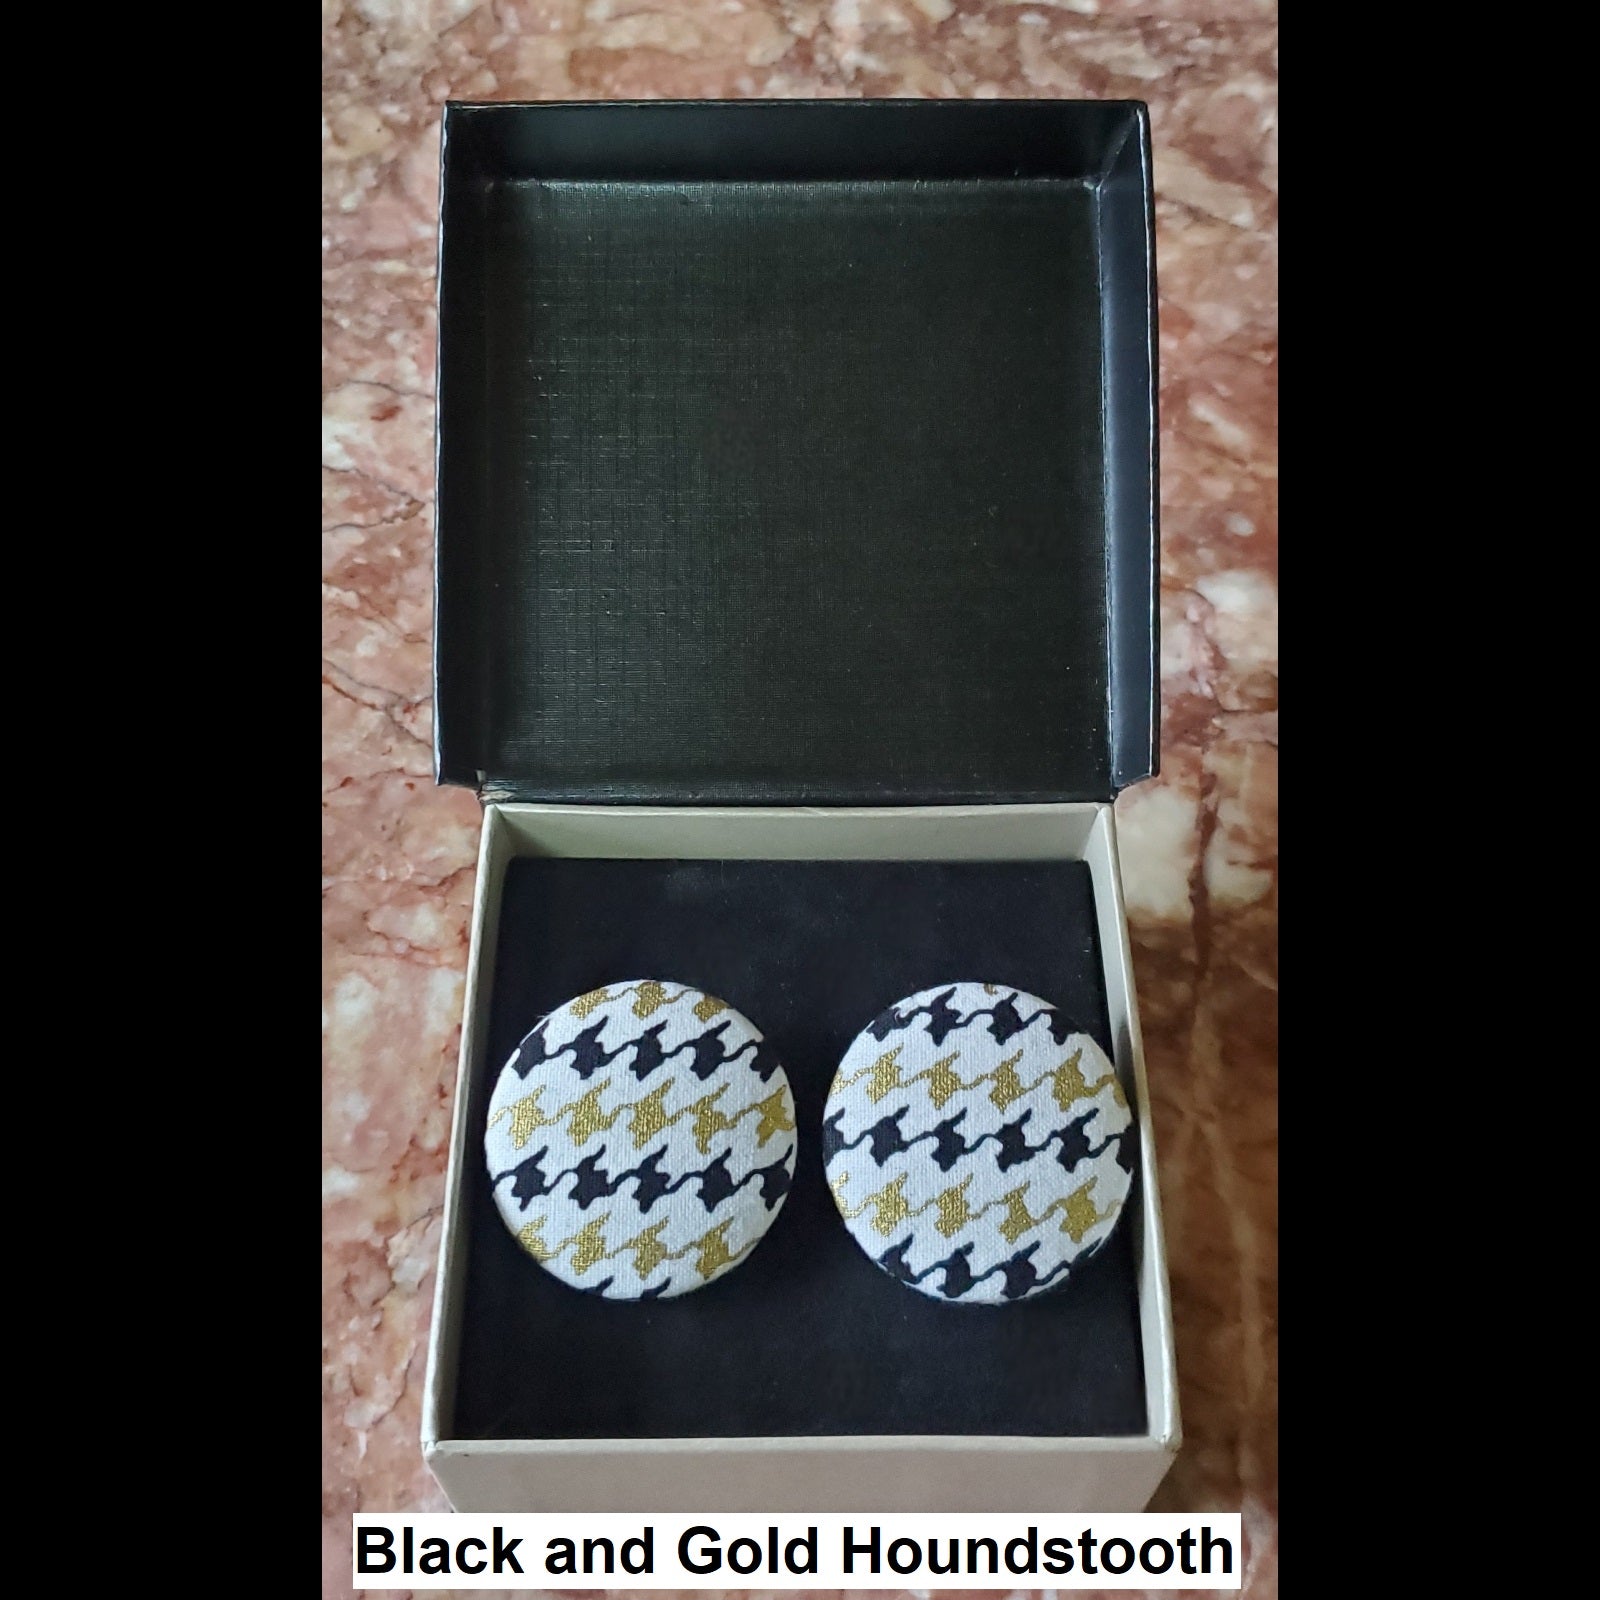 black and gold houndstooth button earrings in jewelry box